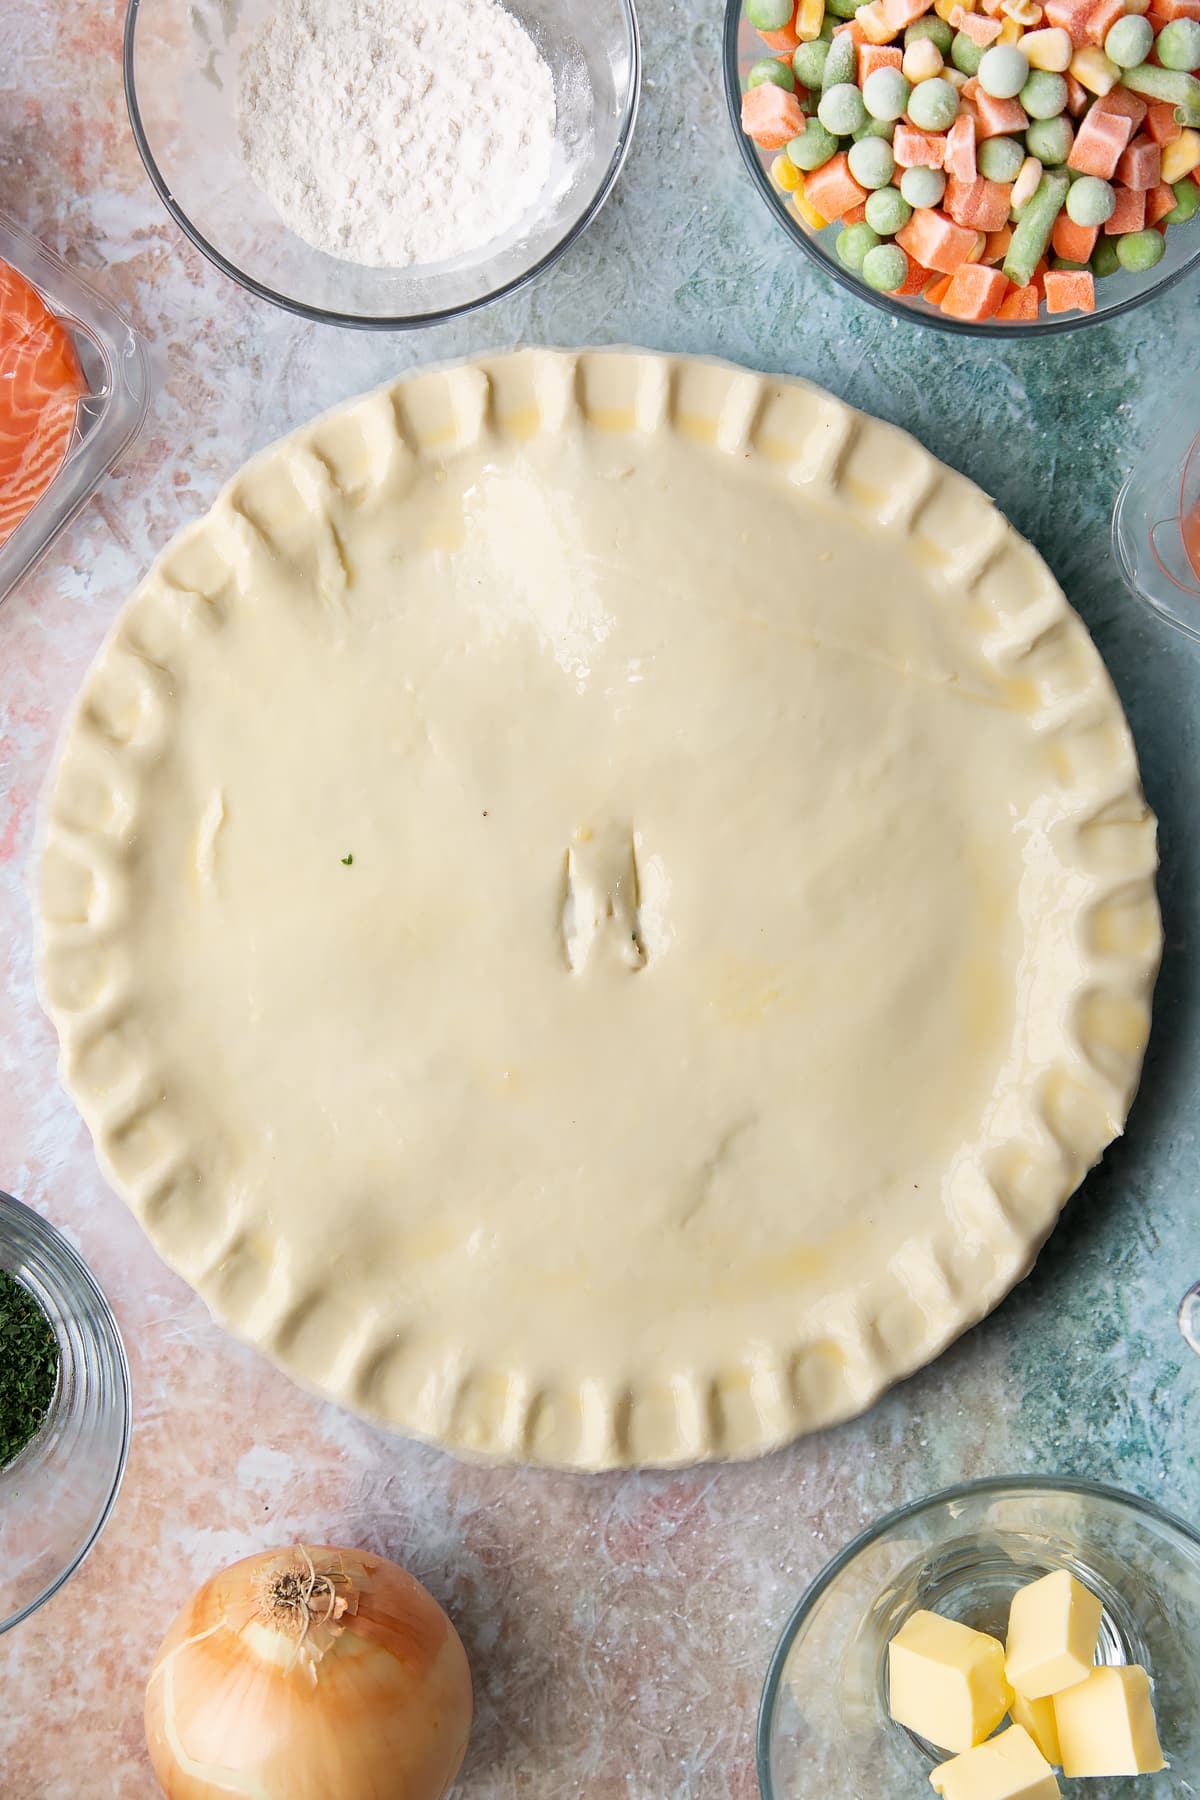 Marking the middle of the salmon pot pie.